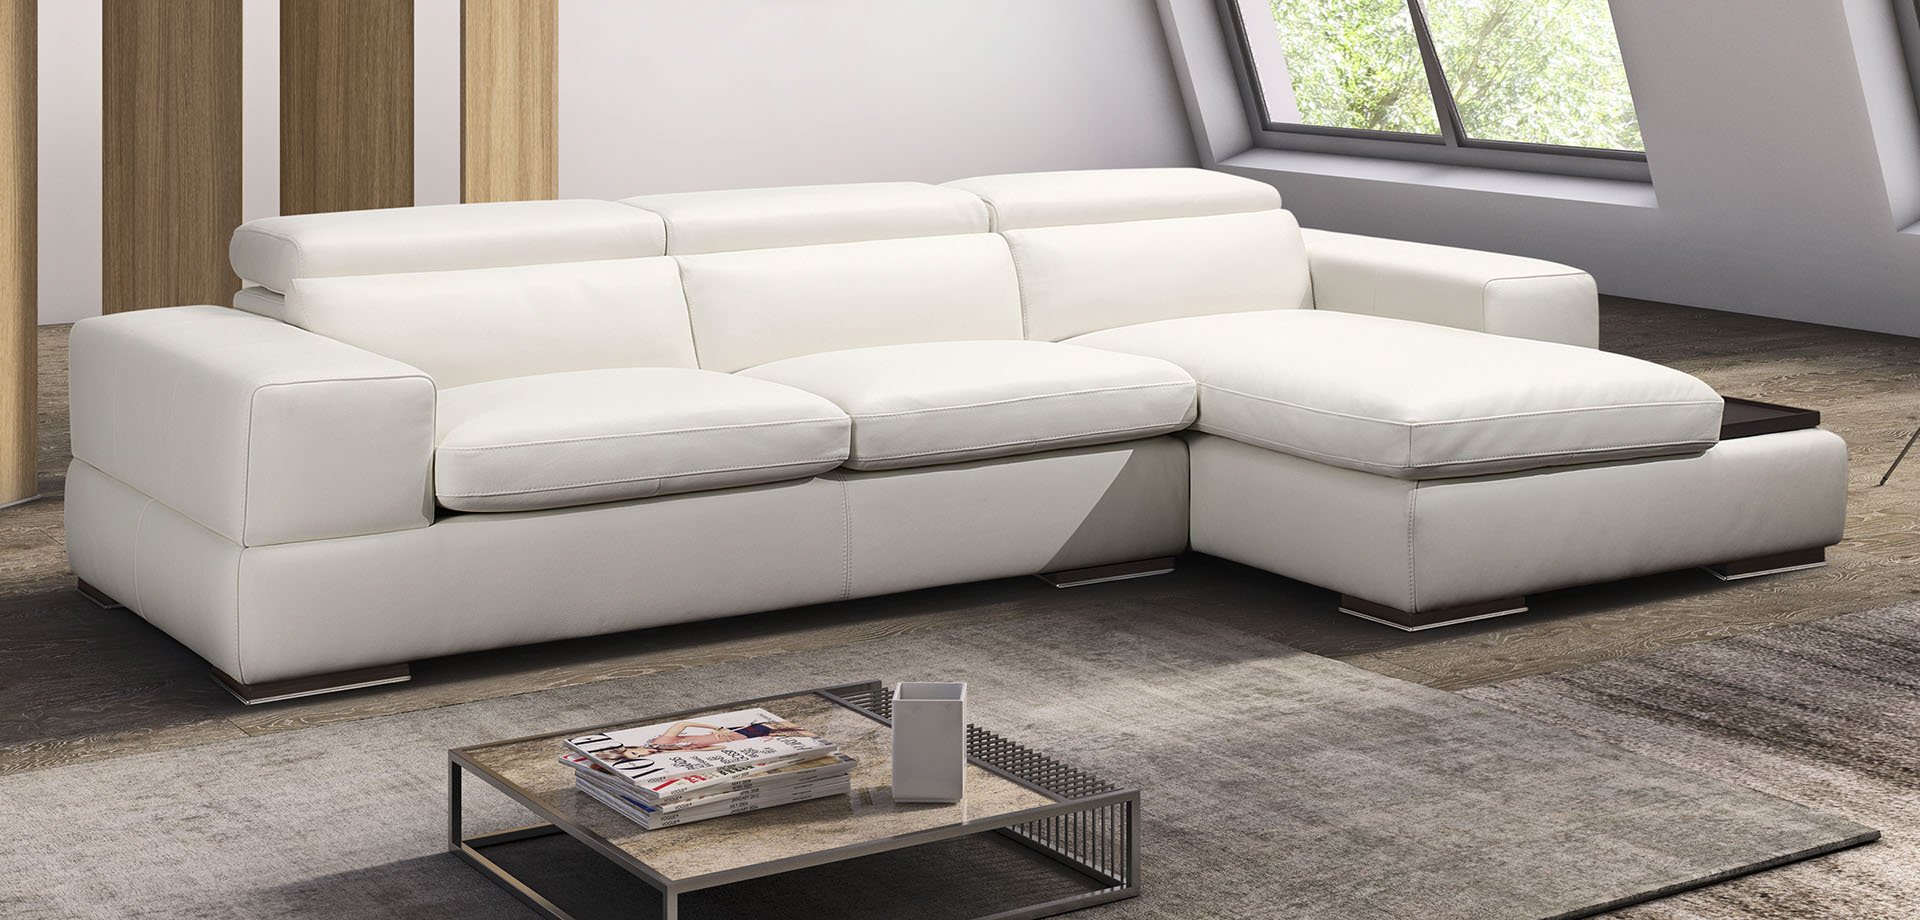 Real Leather Sofas Modern Mfc